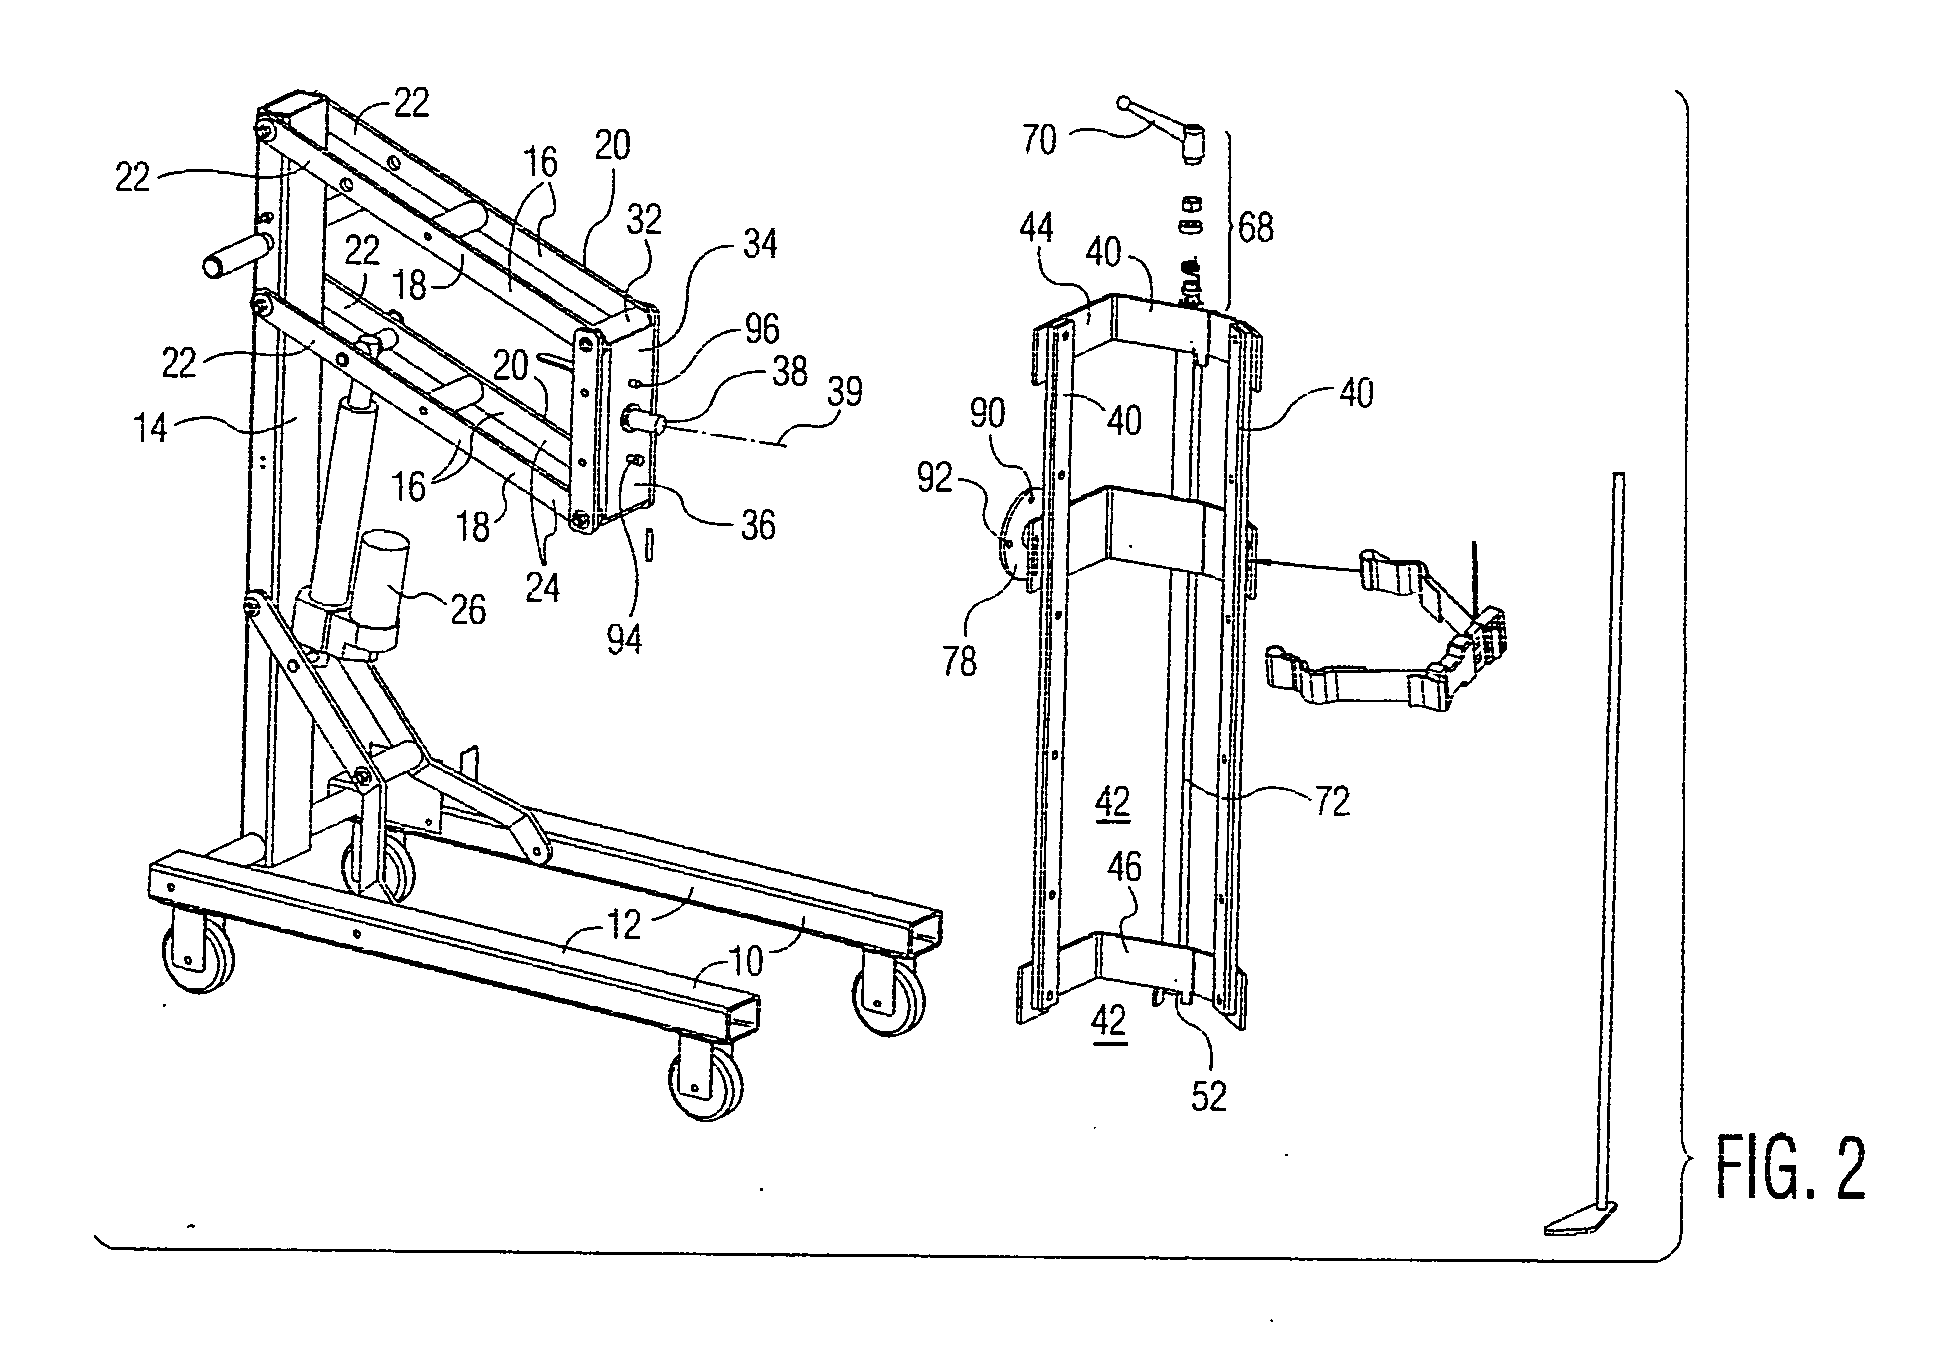 Tank Handling Apparatus for use Lifting, Supporting and Manipulating Cylindrical Tanks